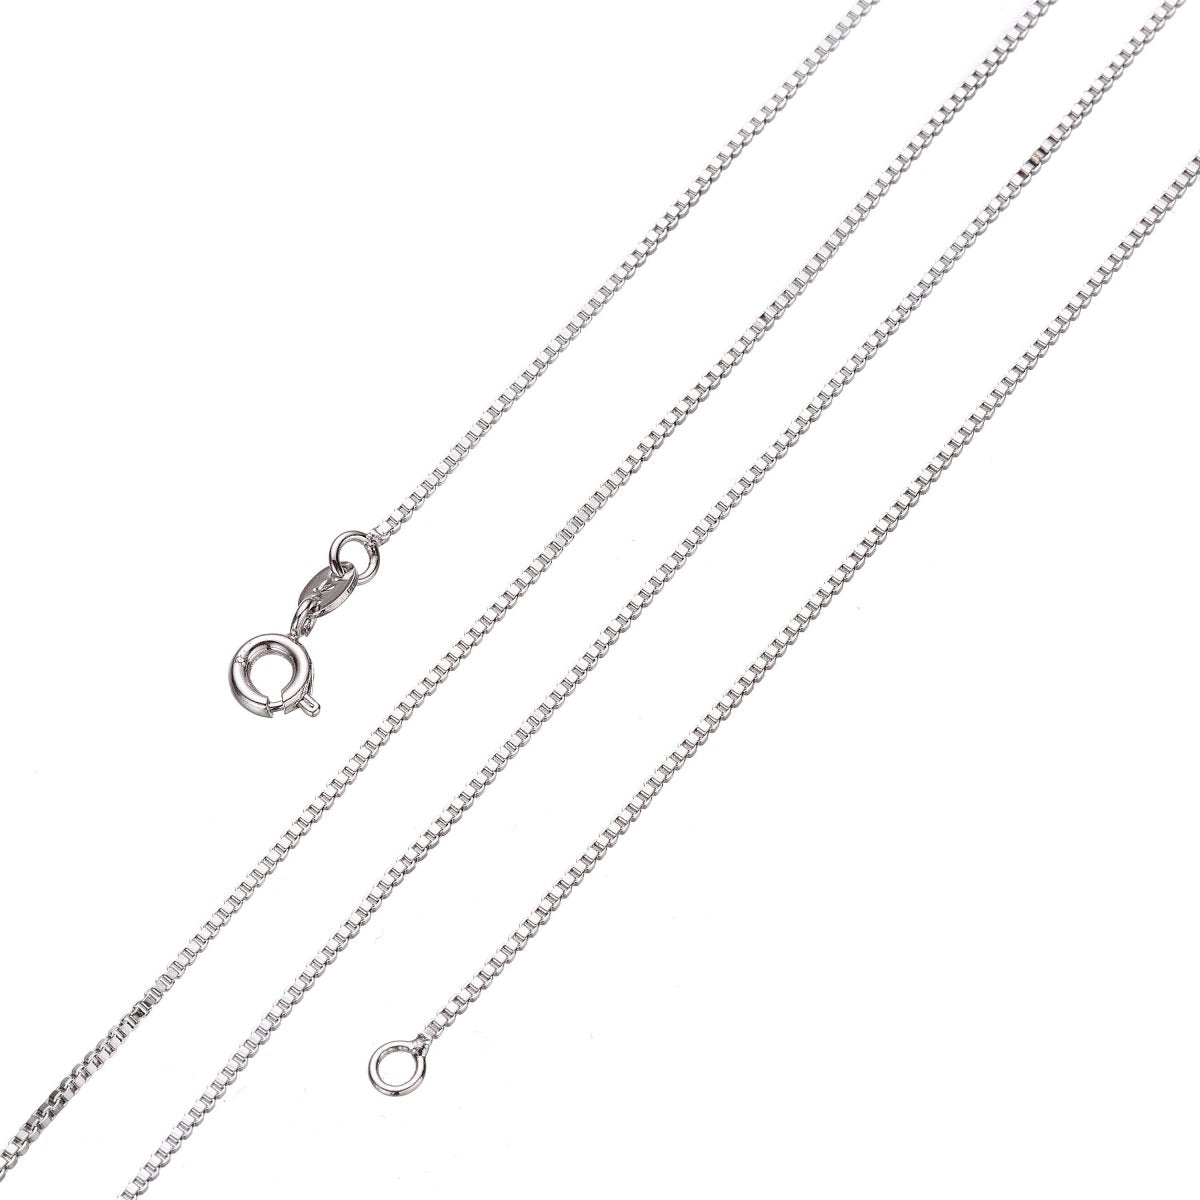 Silver Box Chain Necklace, Dainty Silver Necklace, Dainty Finished Silver Chain 17.5" inch 0.8mm Ready to wear Silver Chain | CN-101 CN-107 Clearance Pricing - DLUXCA